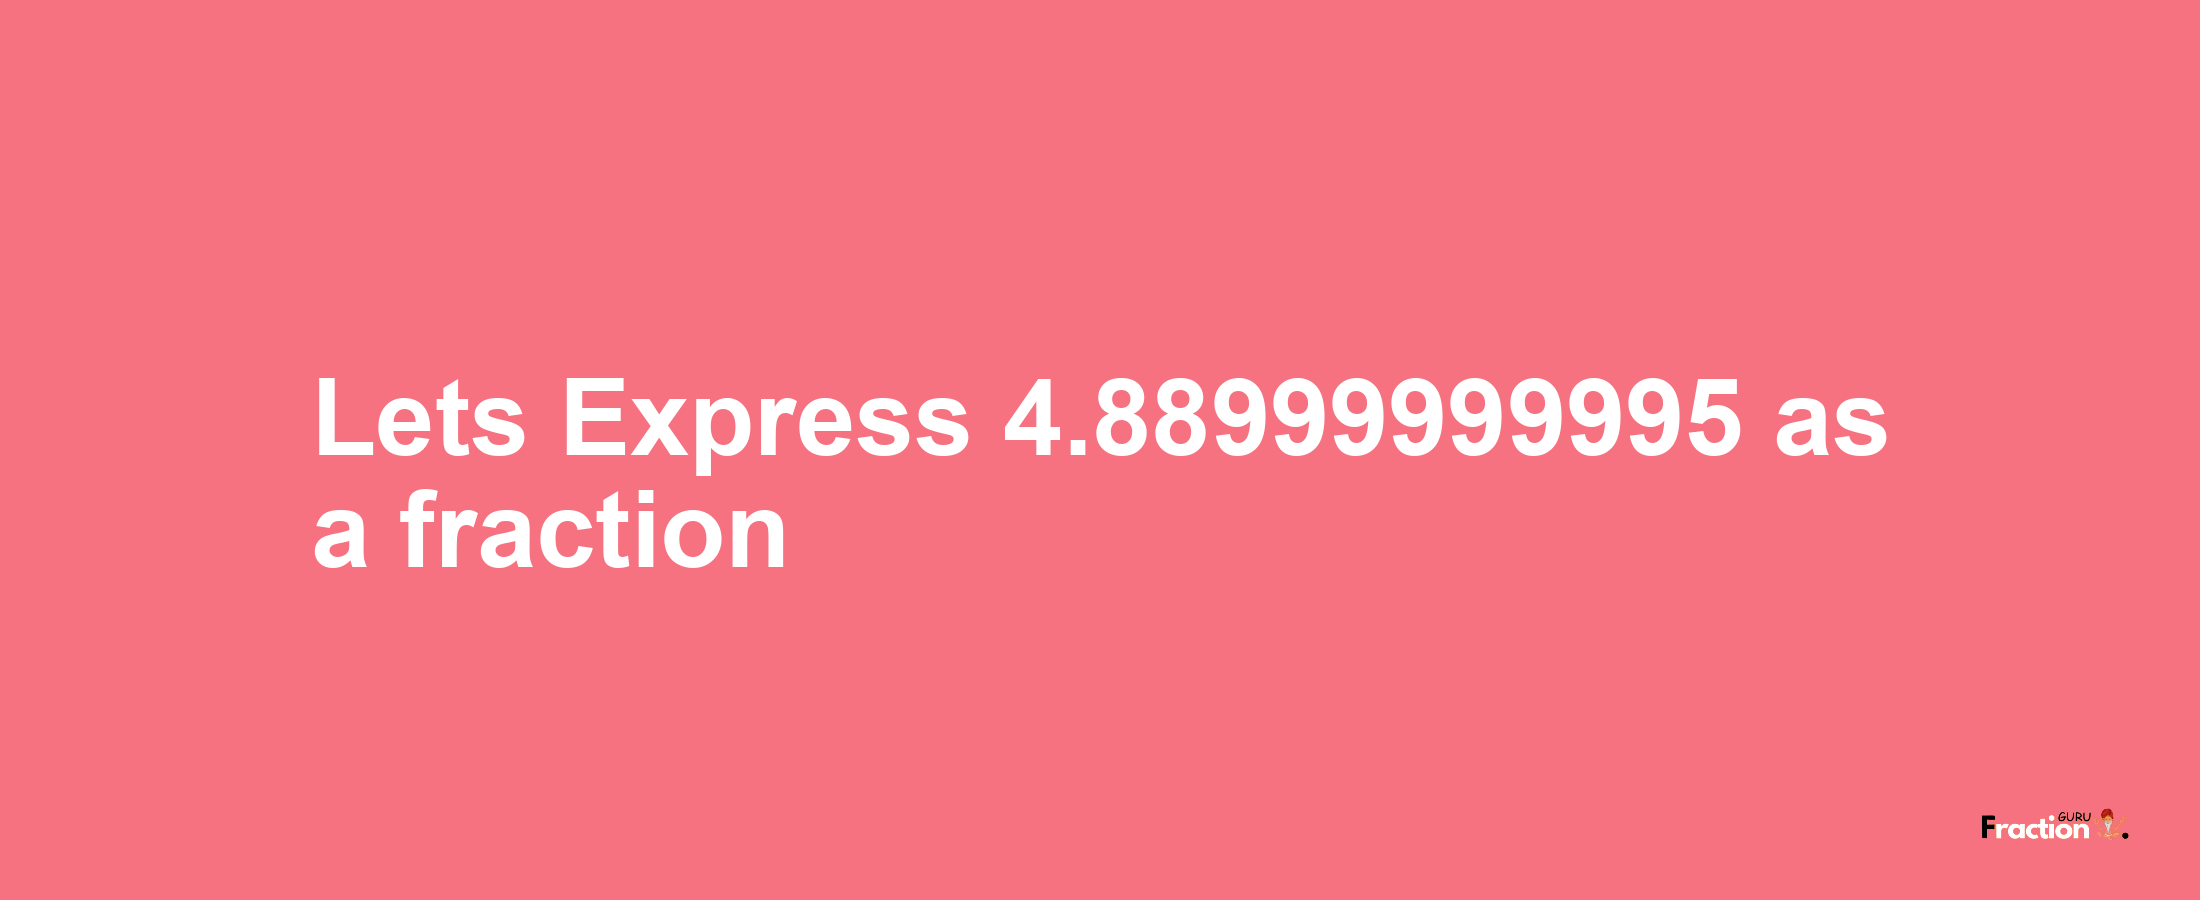 Lets Express 4.88999999995 as afraction